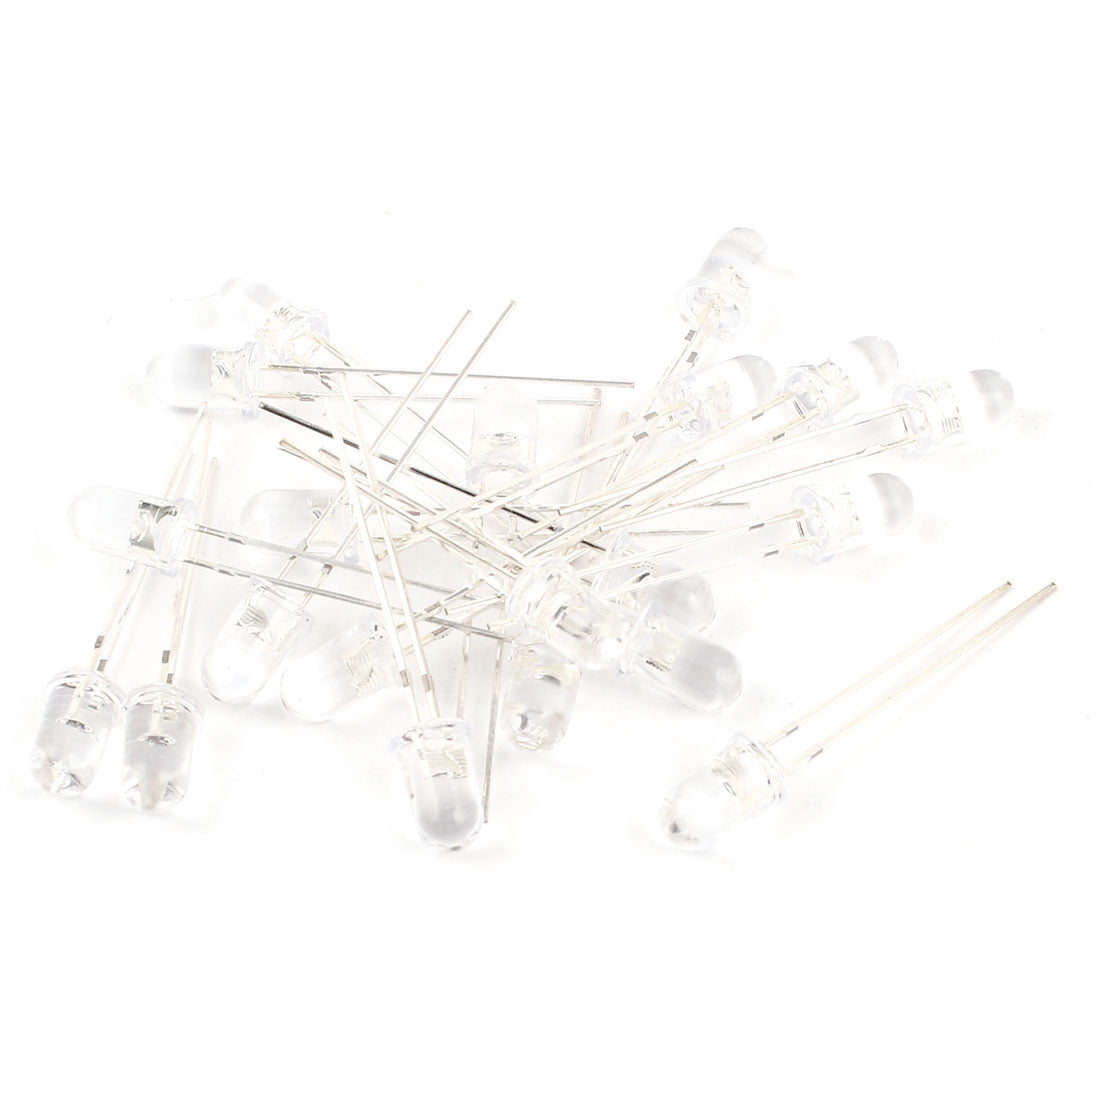 30 pcs TO-3P Diode Triode Transistor Gray Isolation Thermique Silicone Cap 